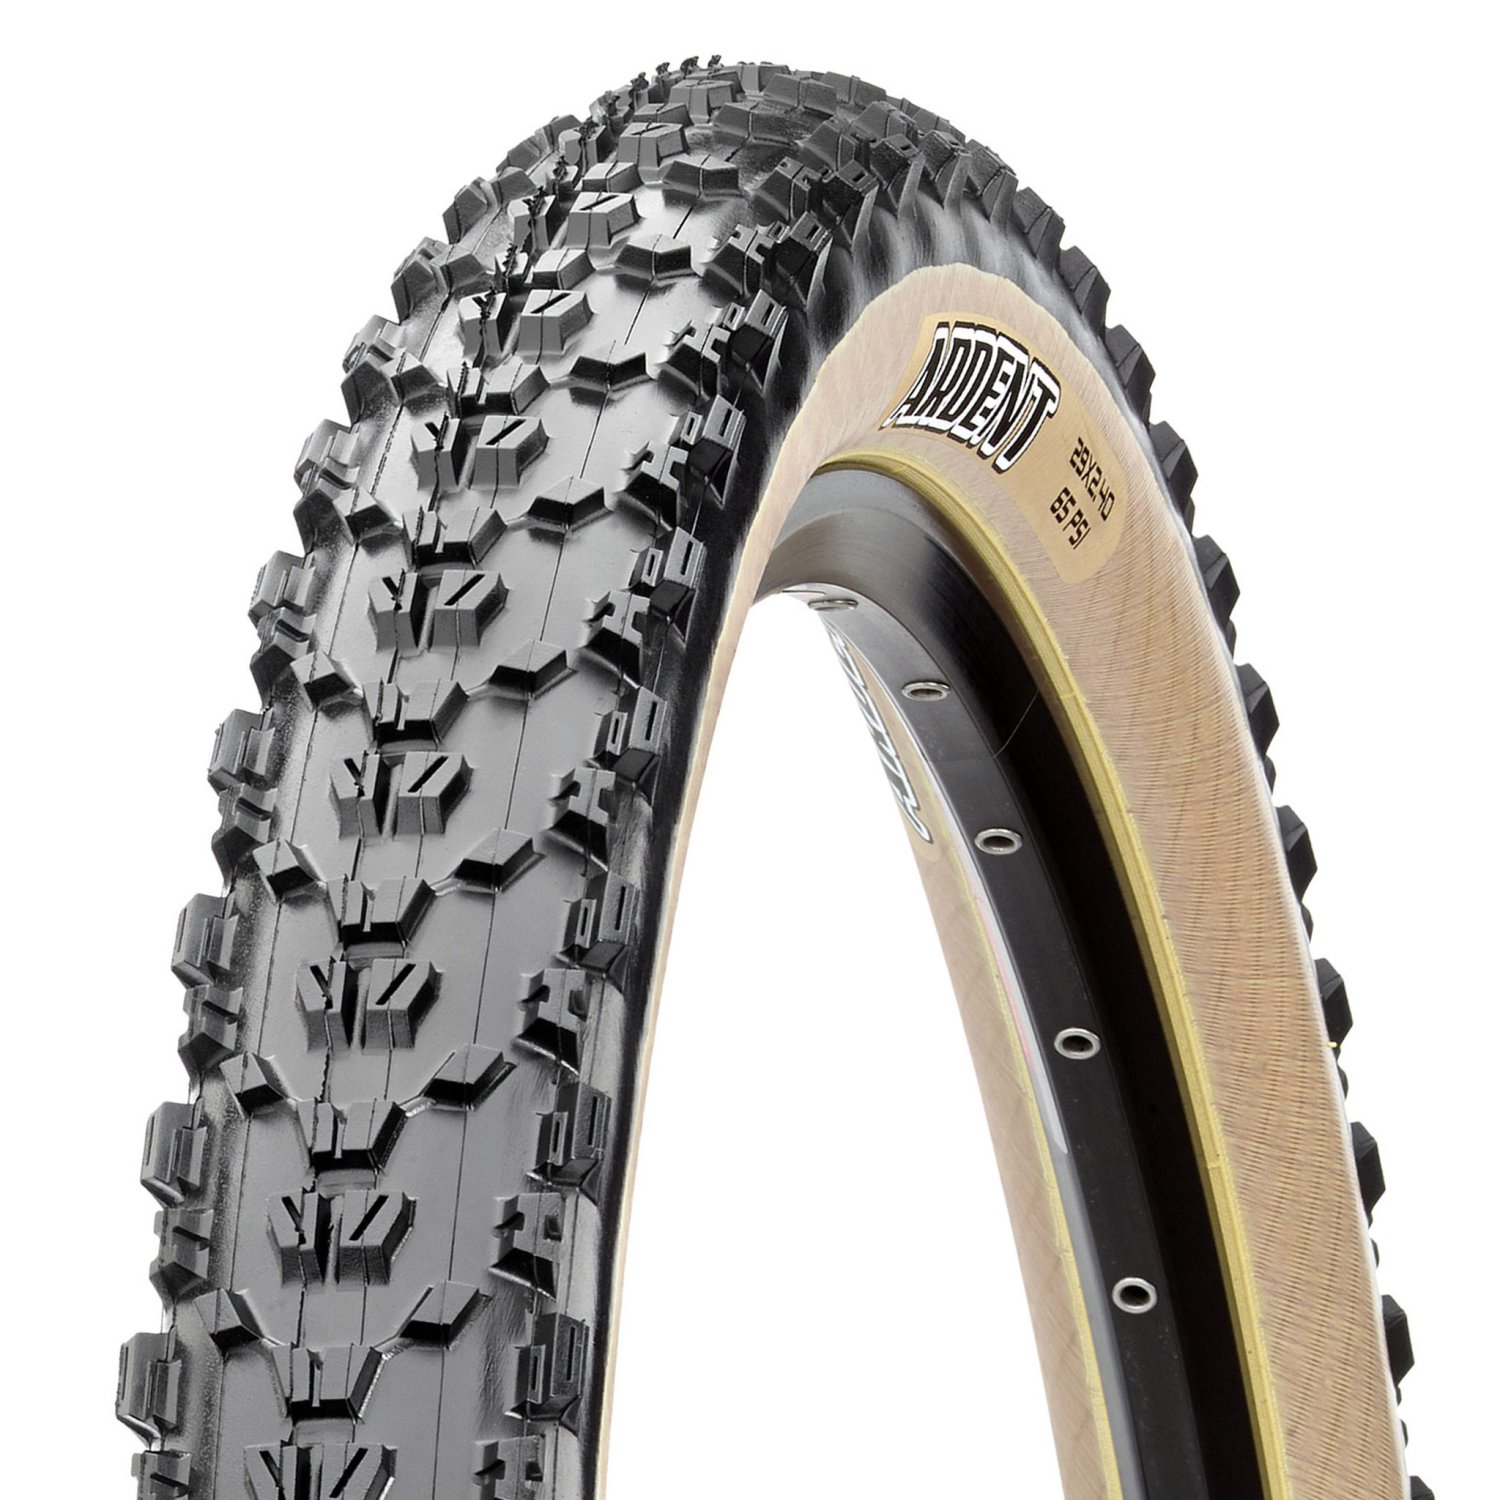 Покрышка велосипедная Maxxis Ardent-Tanwall, 29x2.4, 60 TPI wire 60a, TB96789100 покрышка велосипедная maxxis rekon 29x2 6 m349ru ft tlr etb00038900